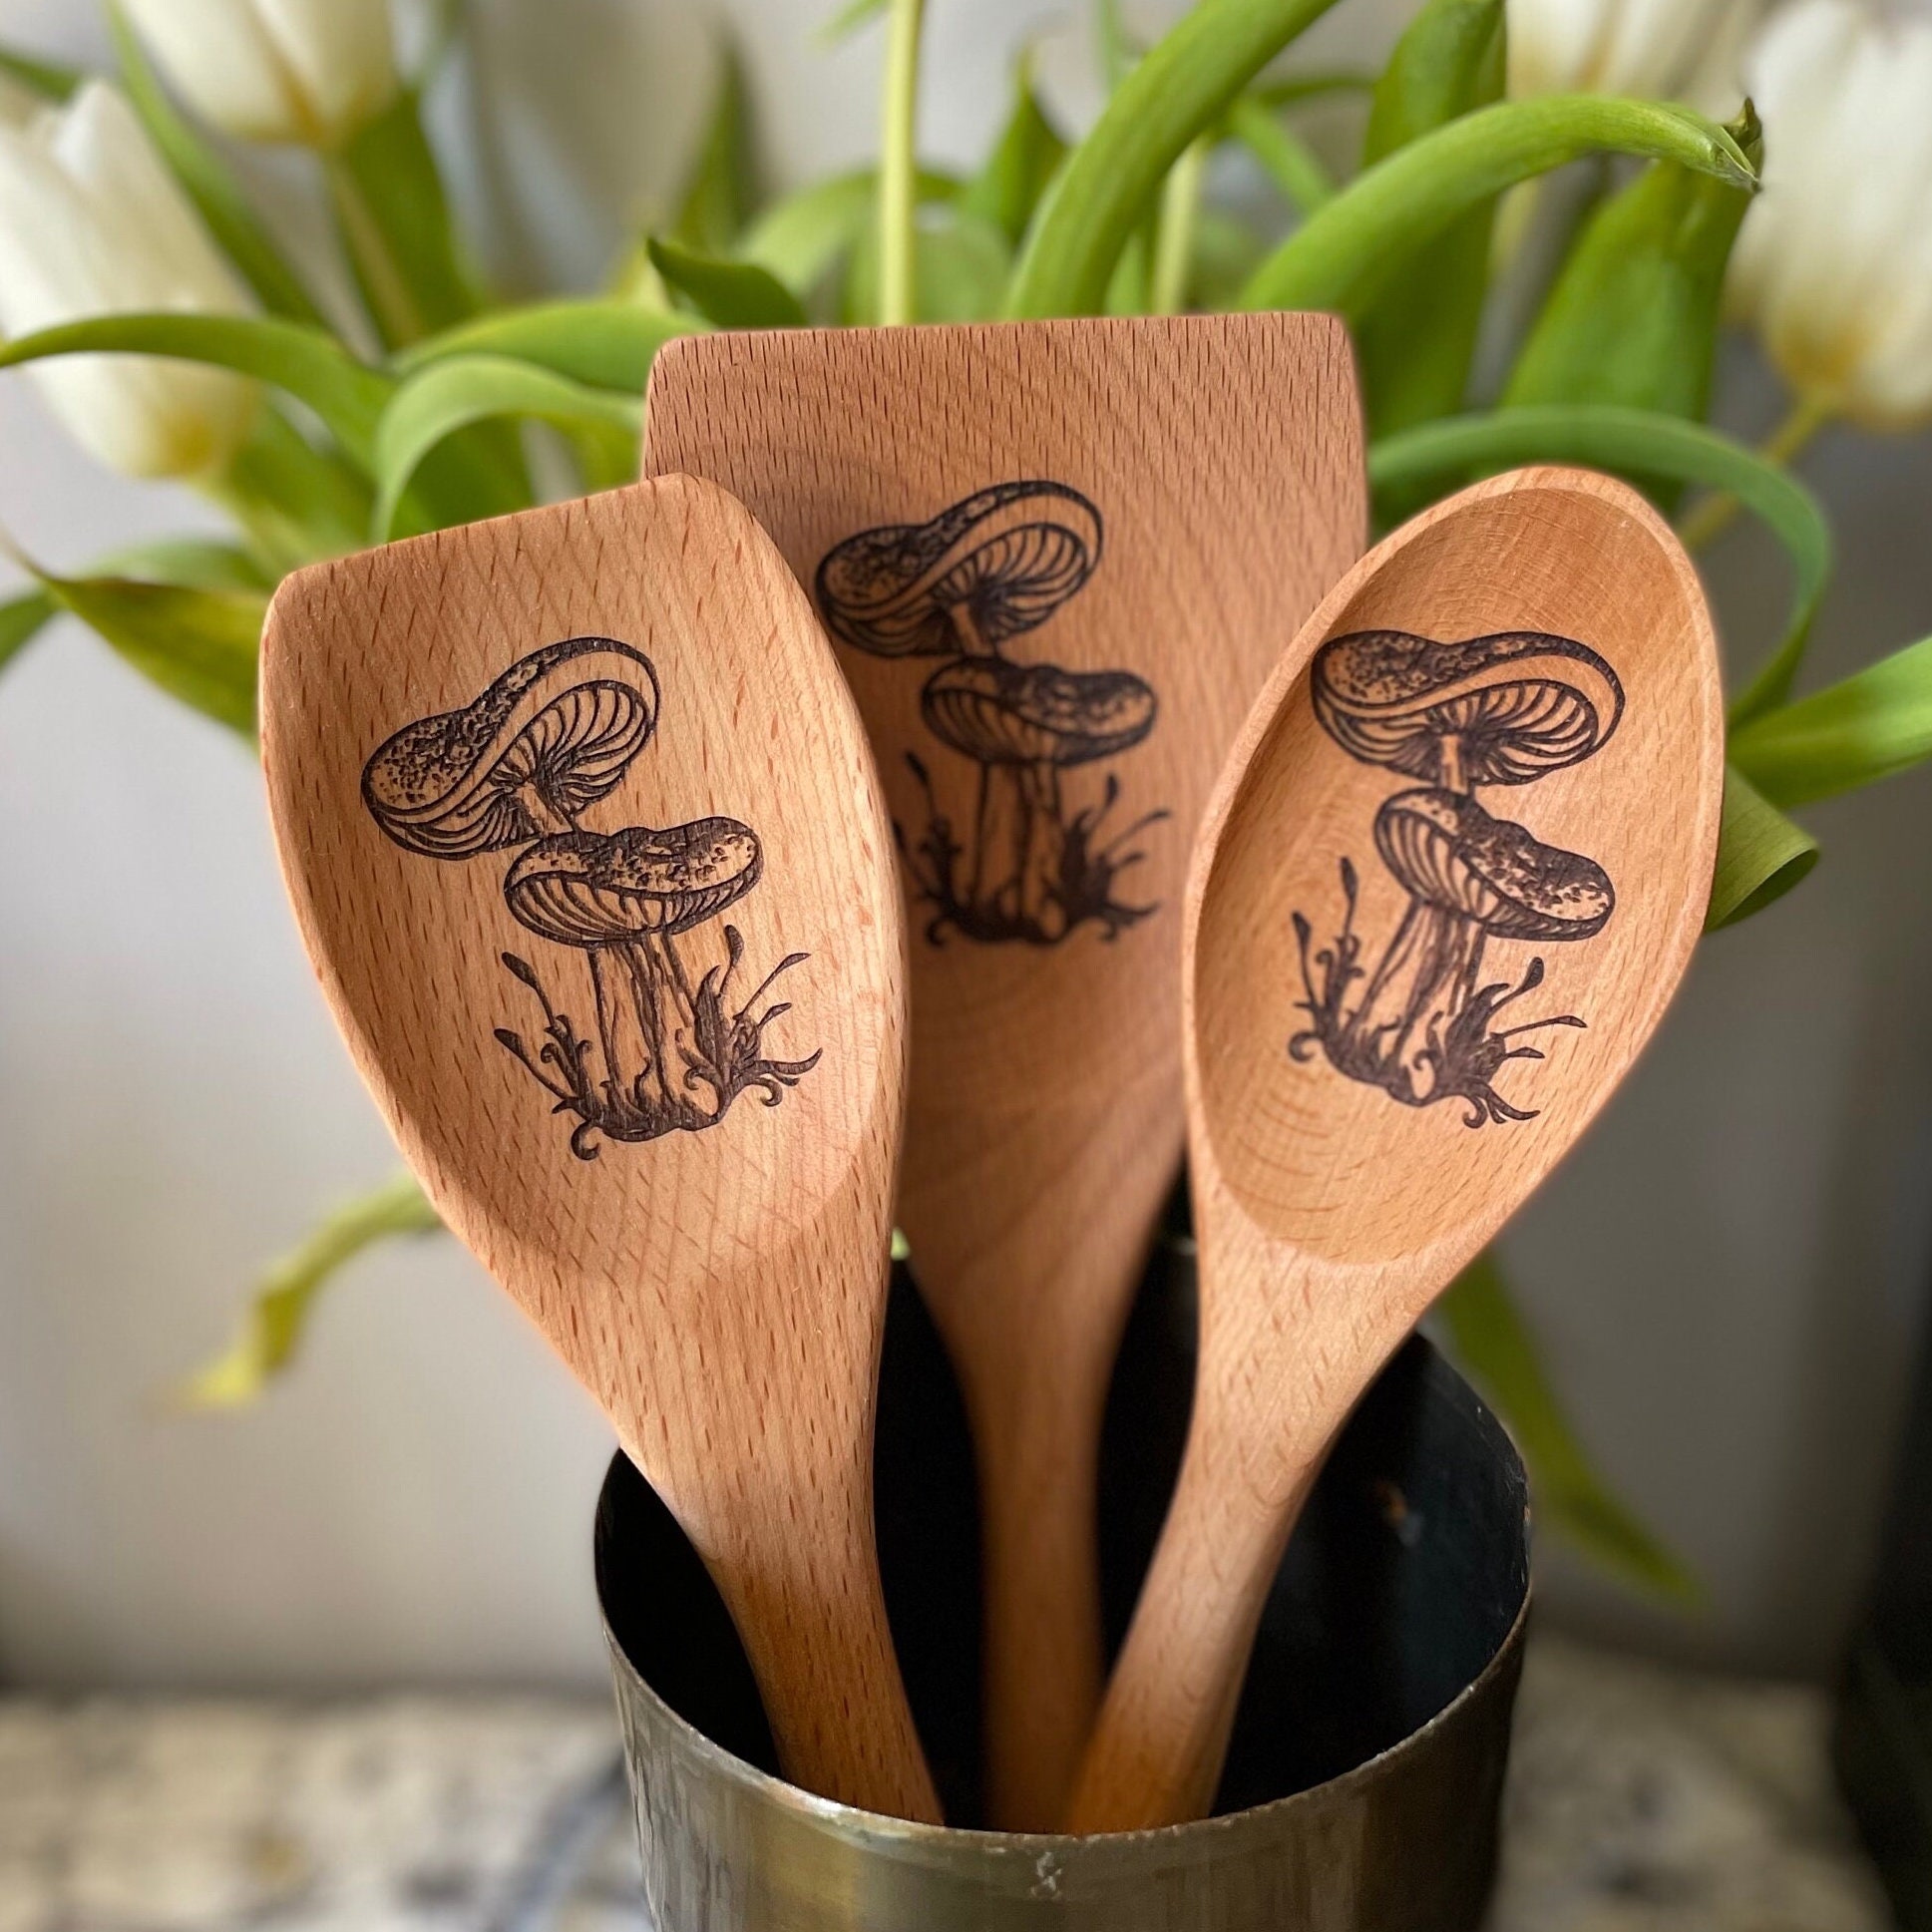  Wooden Spoons for Cooking, Funny Inspired Quotes Laser Engraved Cooking  Utensils Set,Kitchen Cooking Supplies, Bamboo Spoon Slotted Kitchen Utensil  Fun Gift Idea Housewarming Gift (Butterfly): Home & Kitchen